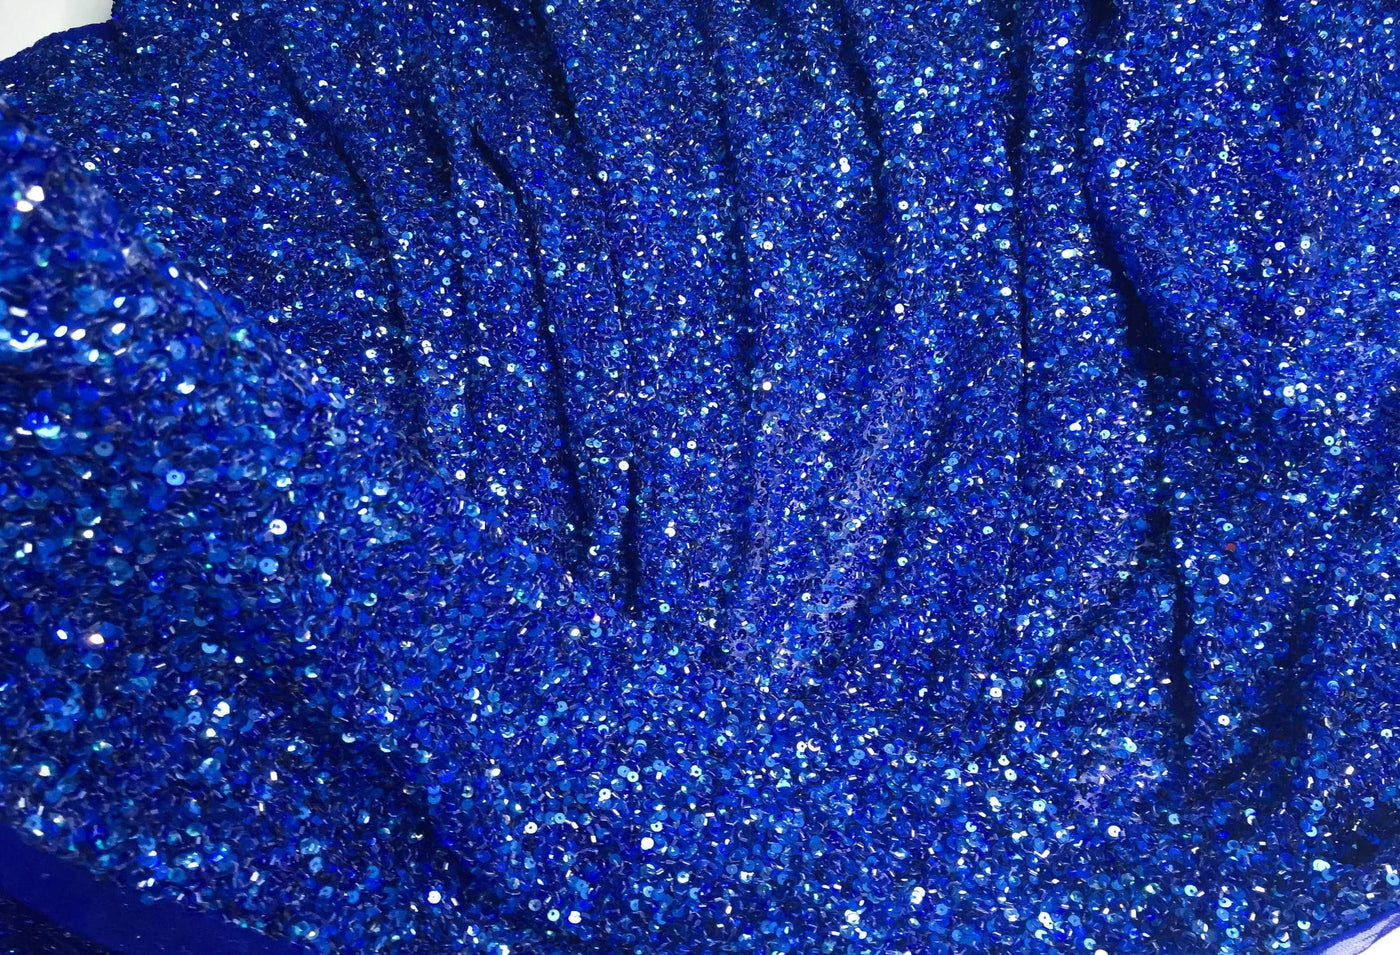 Encaje hecho a mano Crowded Royal Blue Sequins- MUESTRA